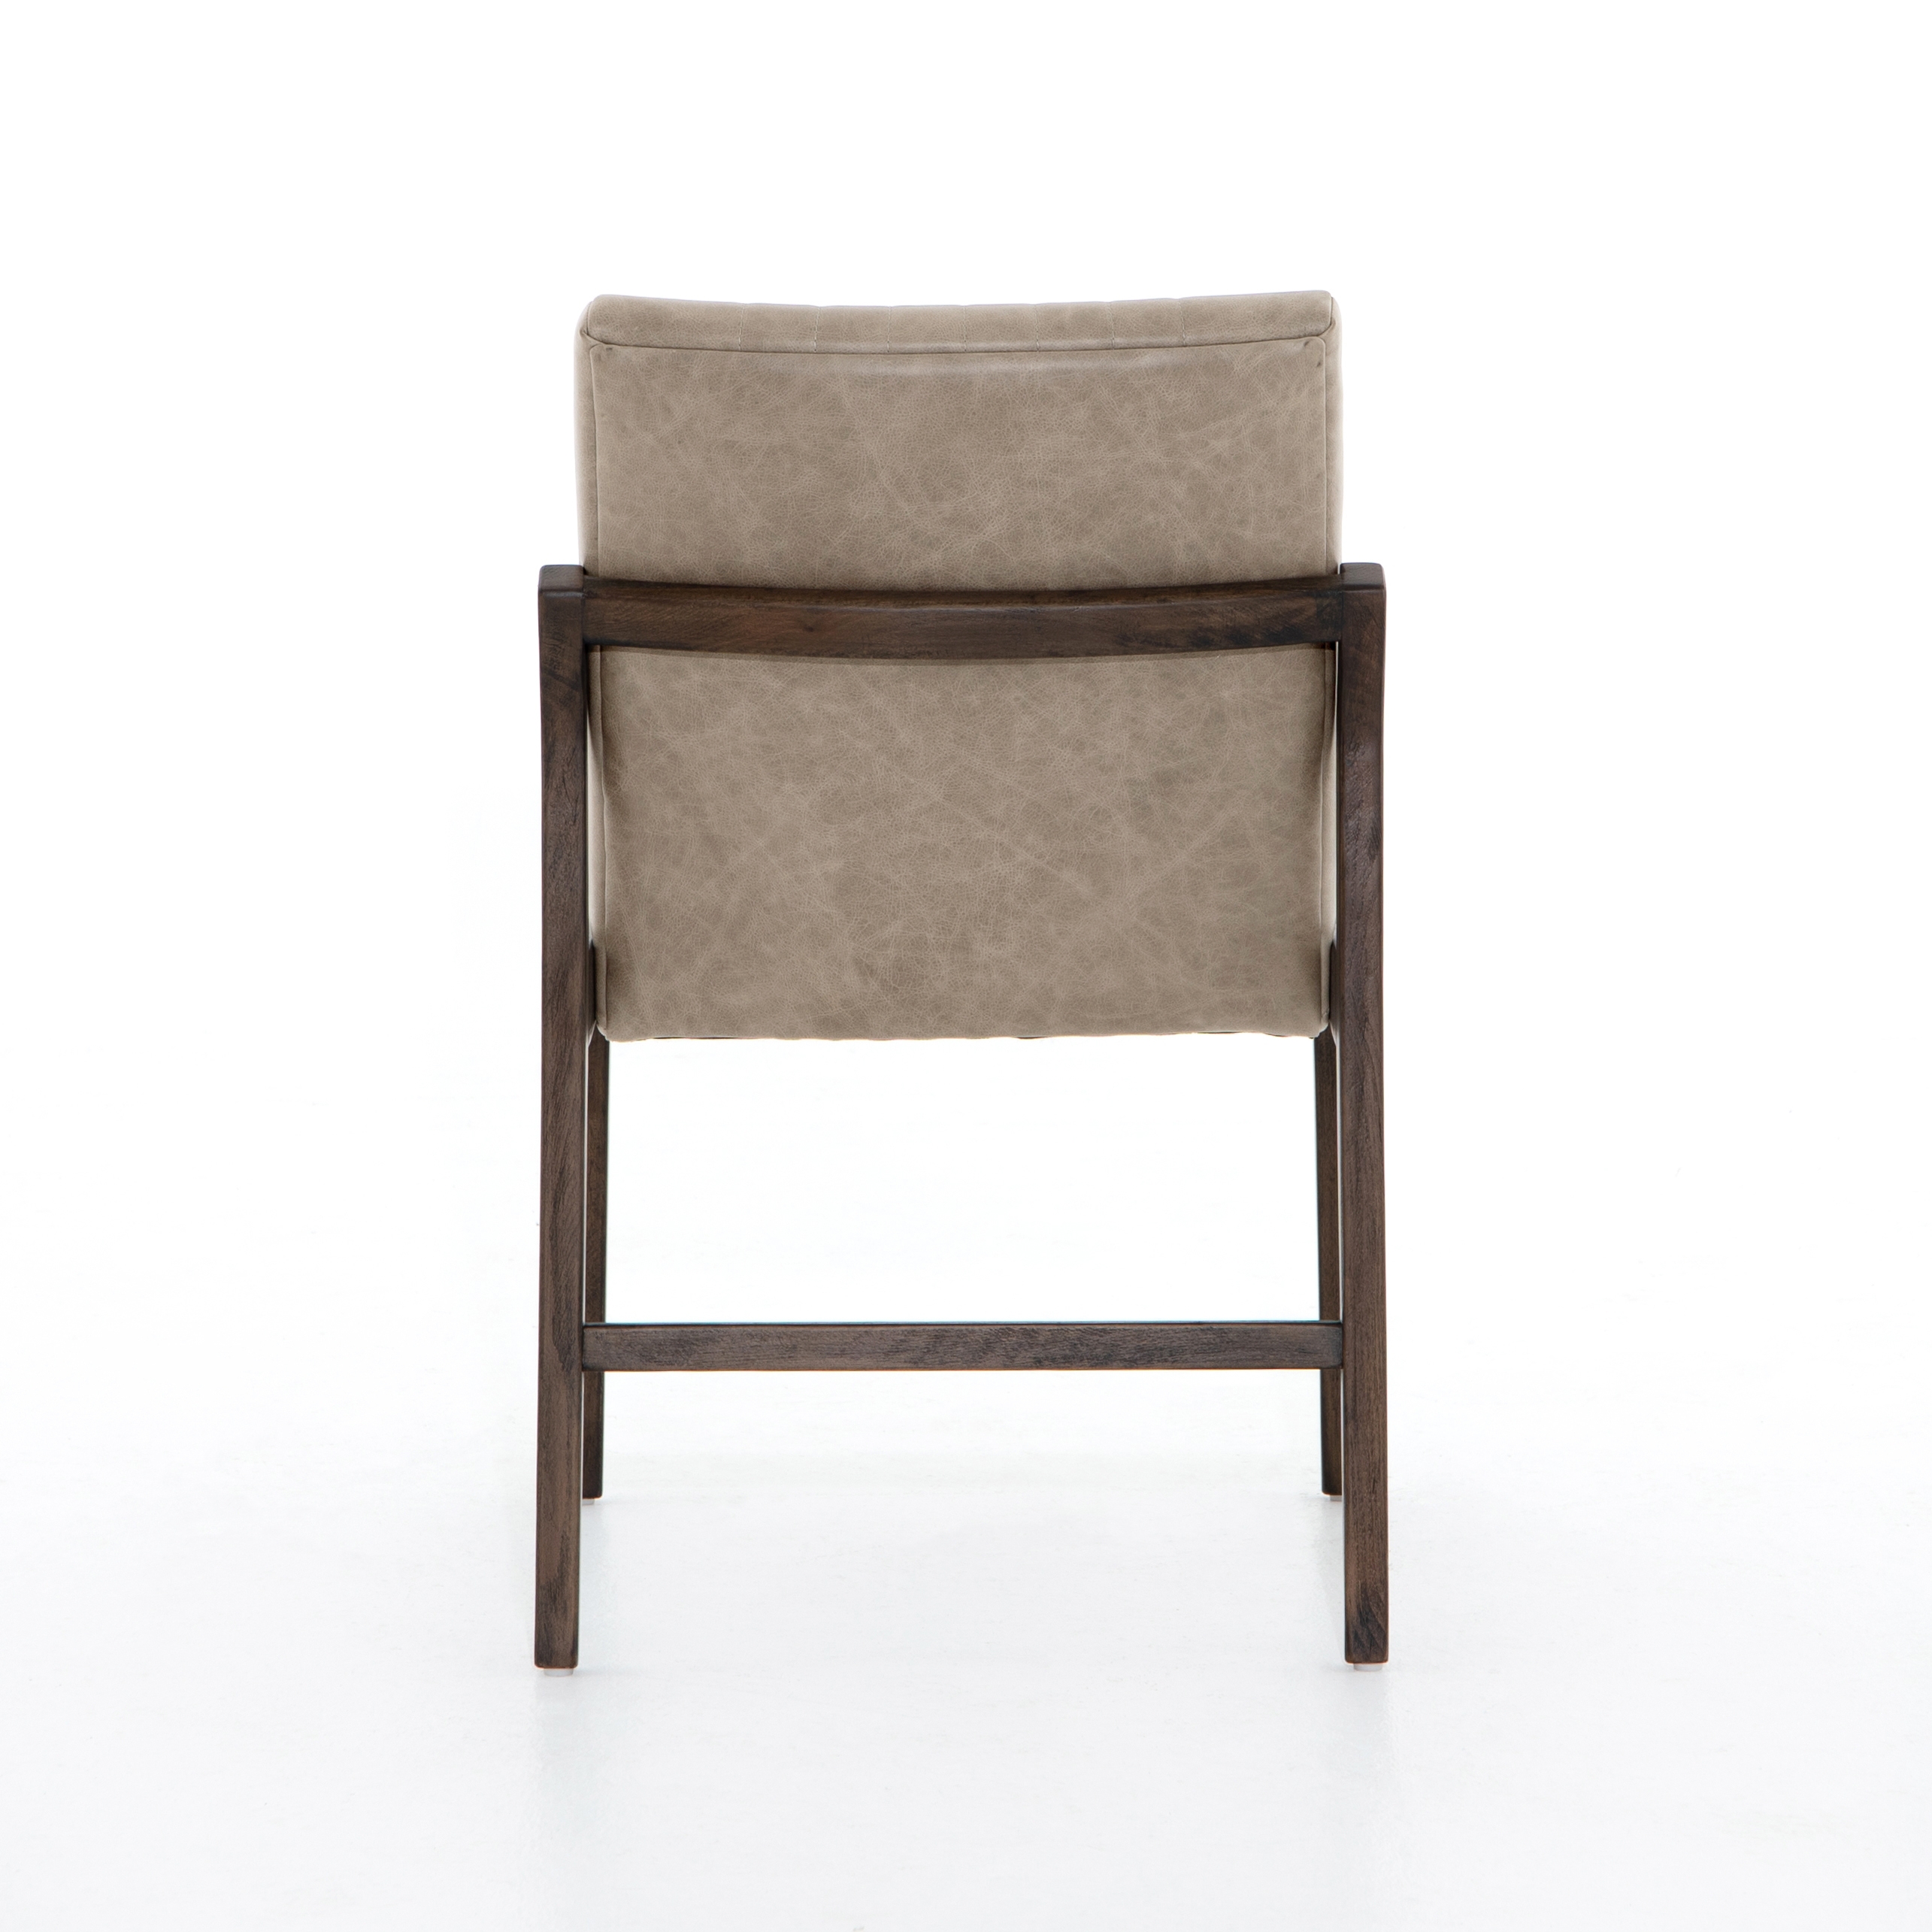 Alice Dining Chair-Sonoma Grey - Image 5